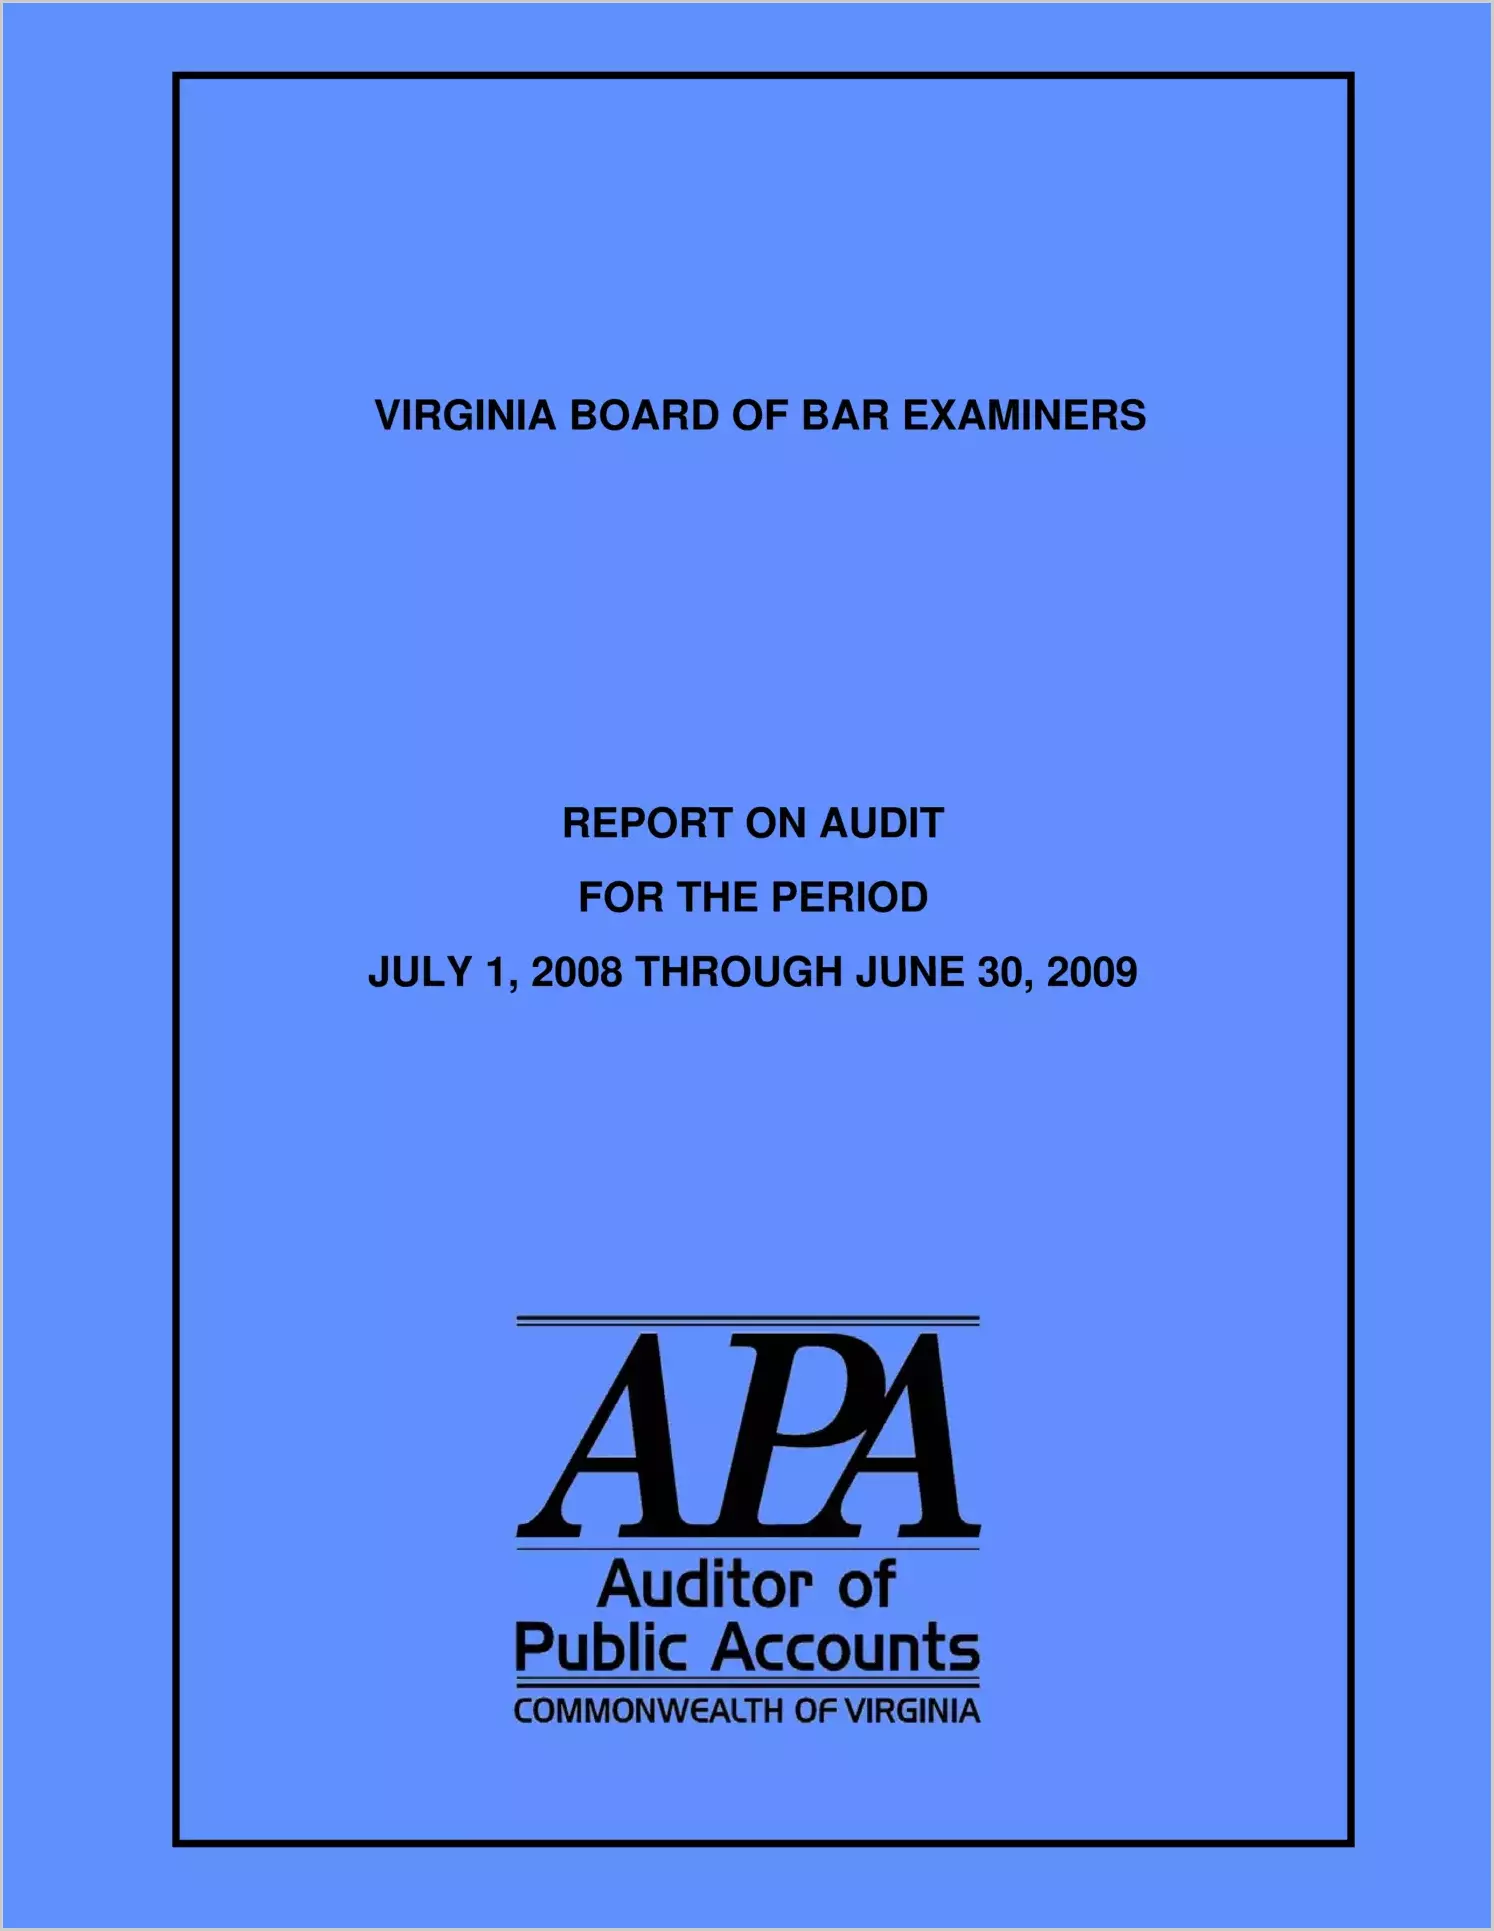 Virginia Board of Bar Examiners Report on Audit for the Period July 1, 2008, through June 30, 2009